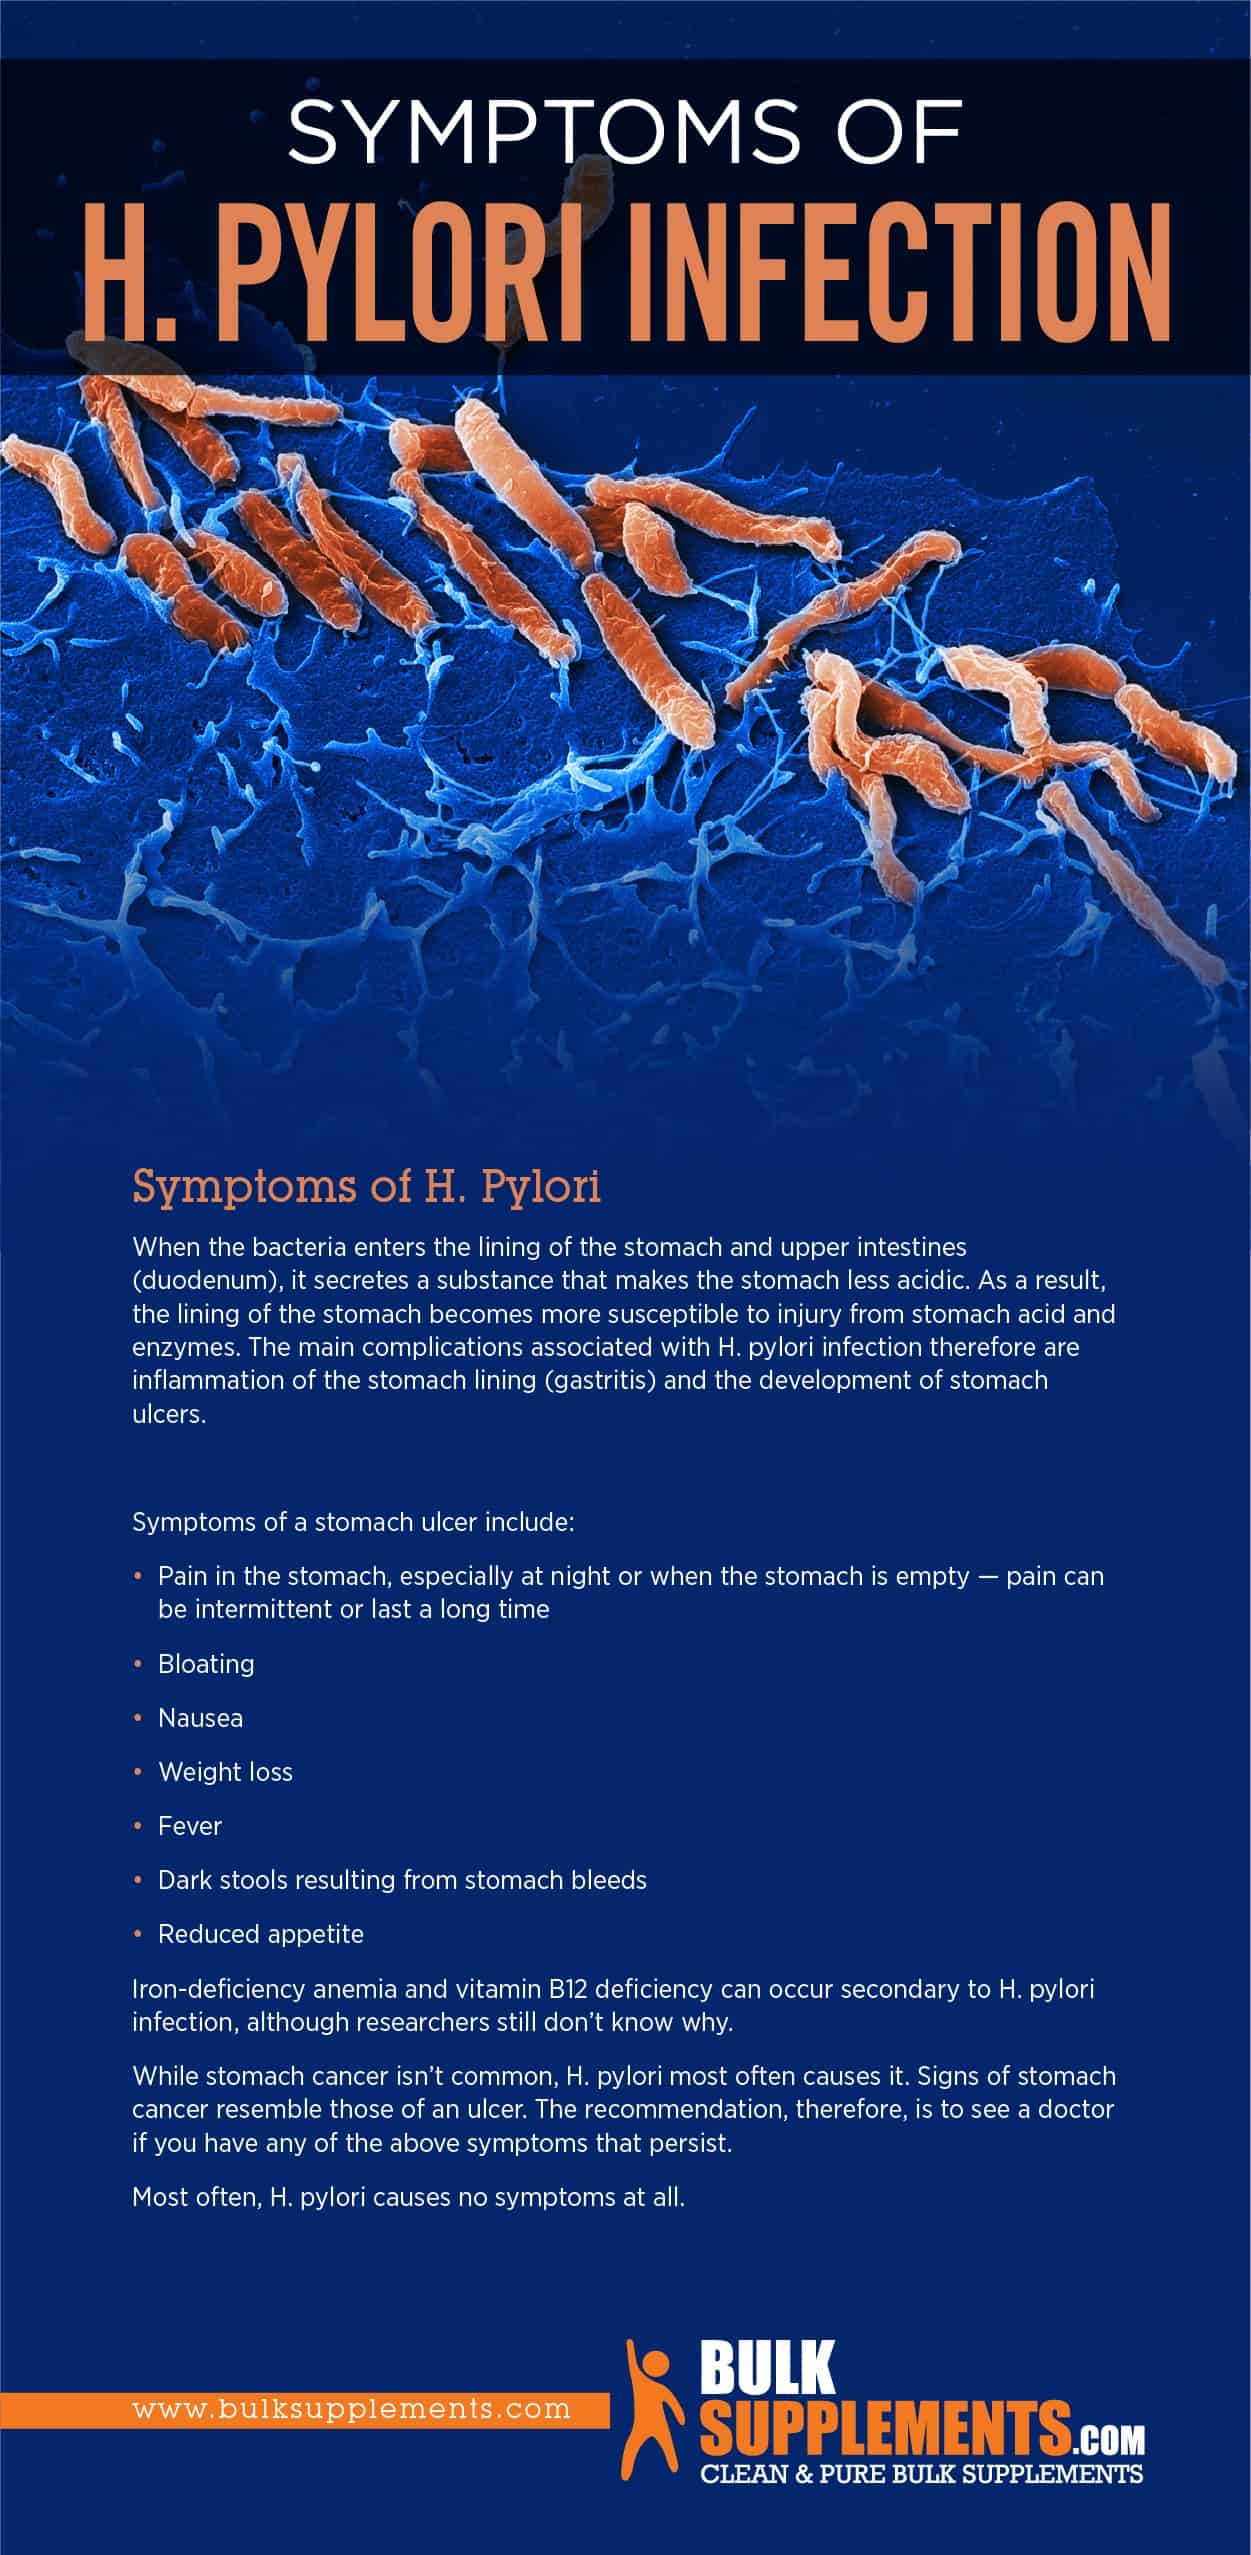 H. pylori Infection Infographic